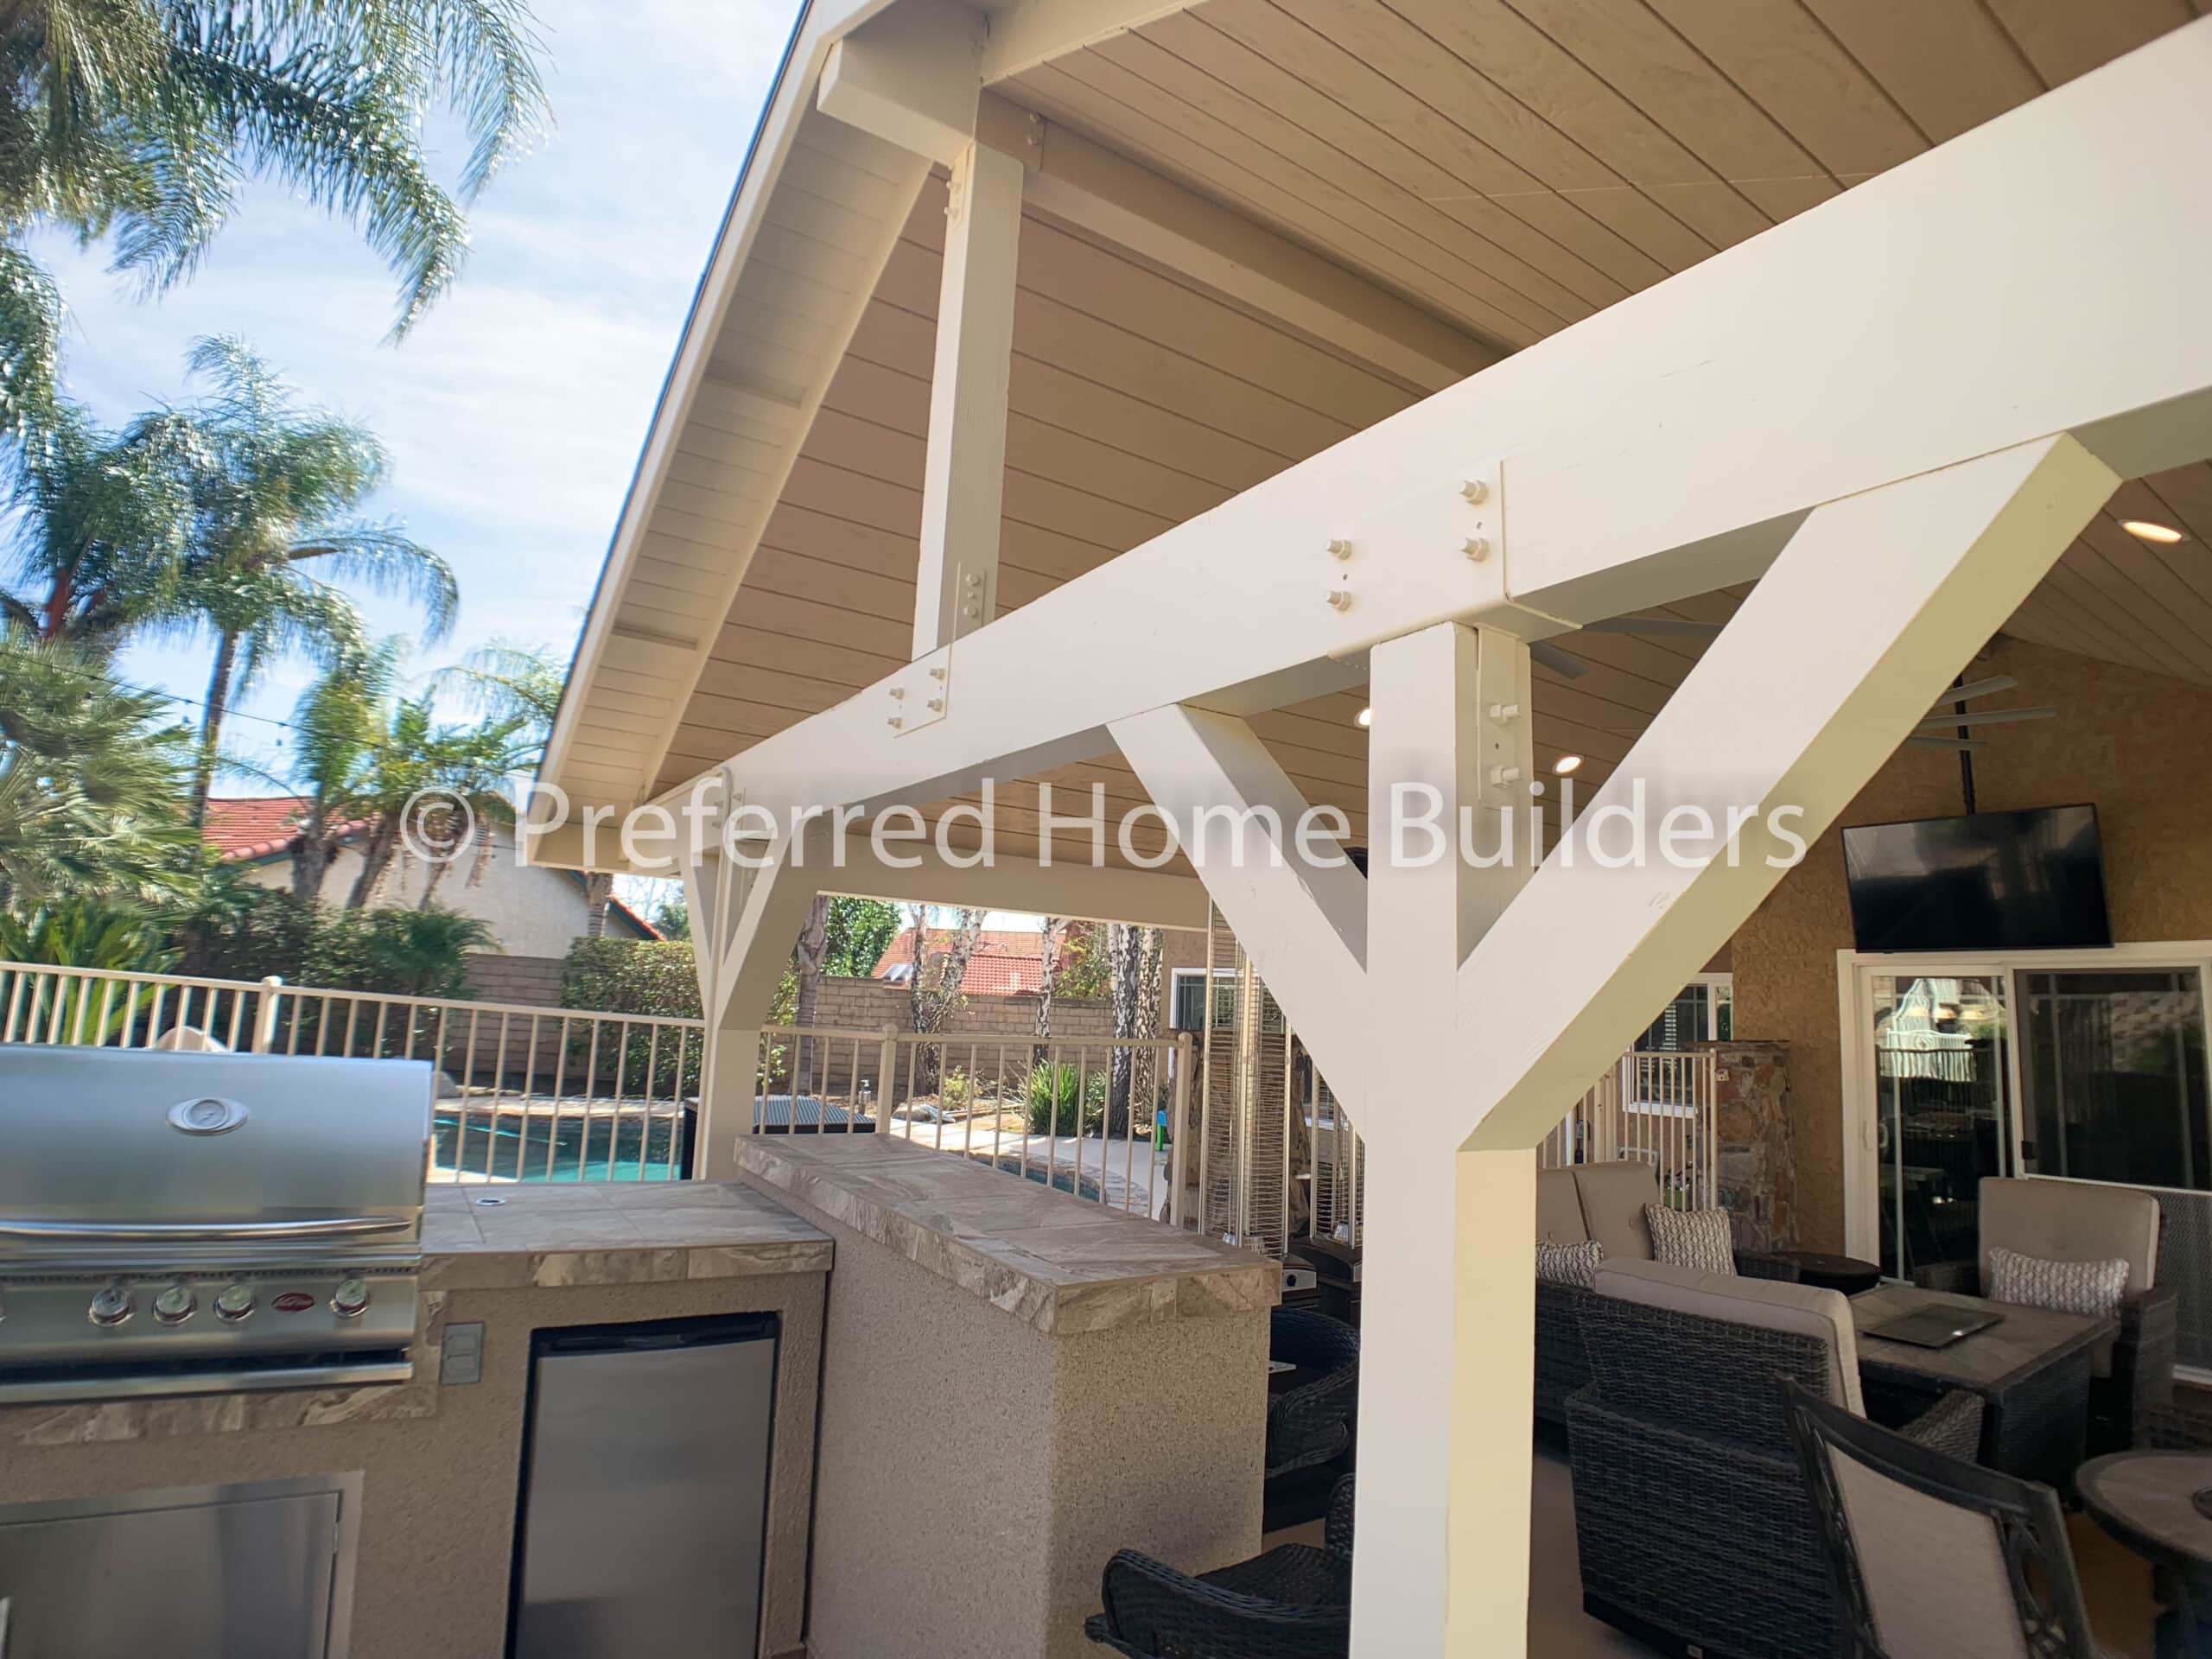 Covered Patio and Outdoor Kitchen Simi Valley 27 scaled 1